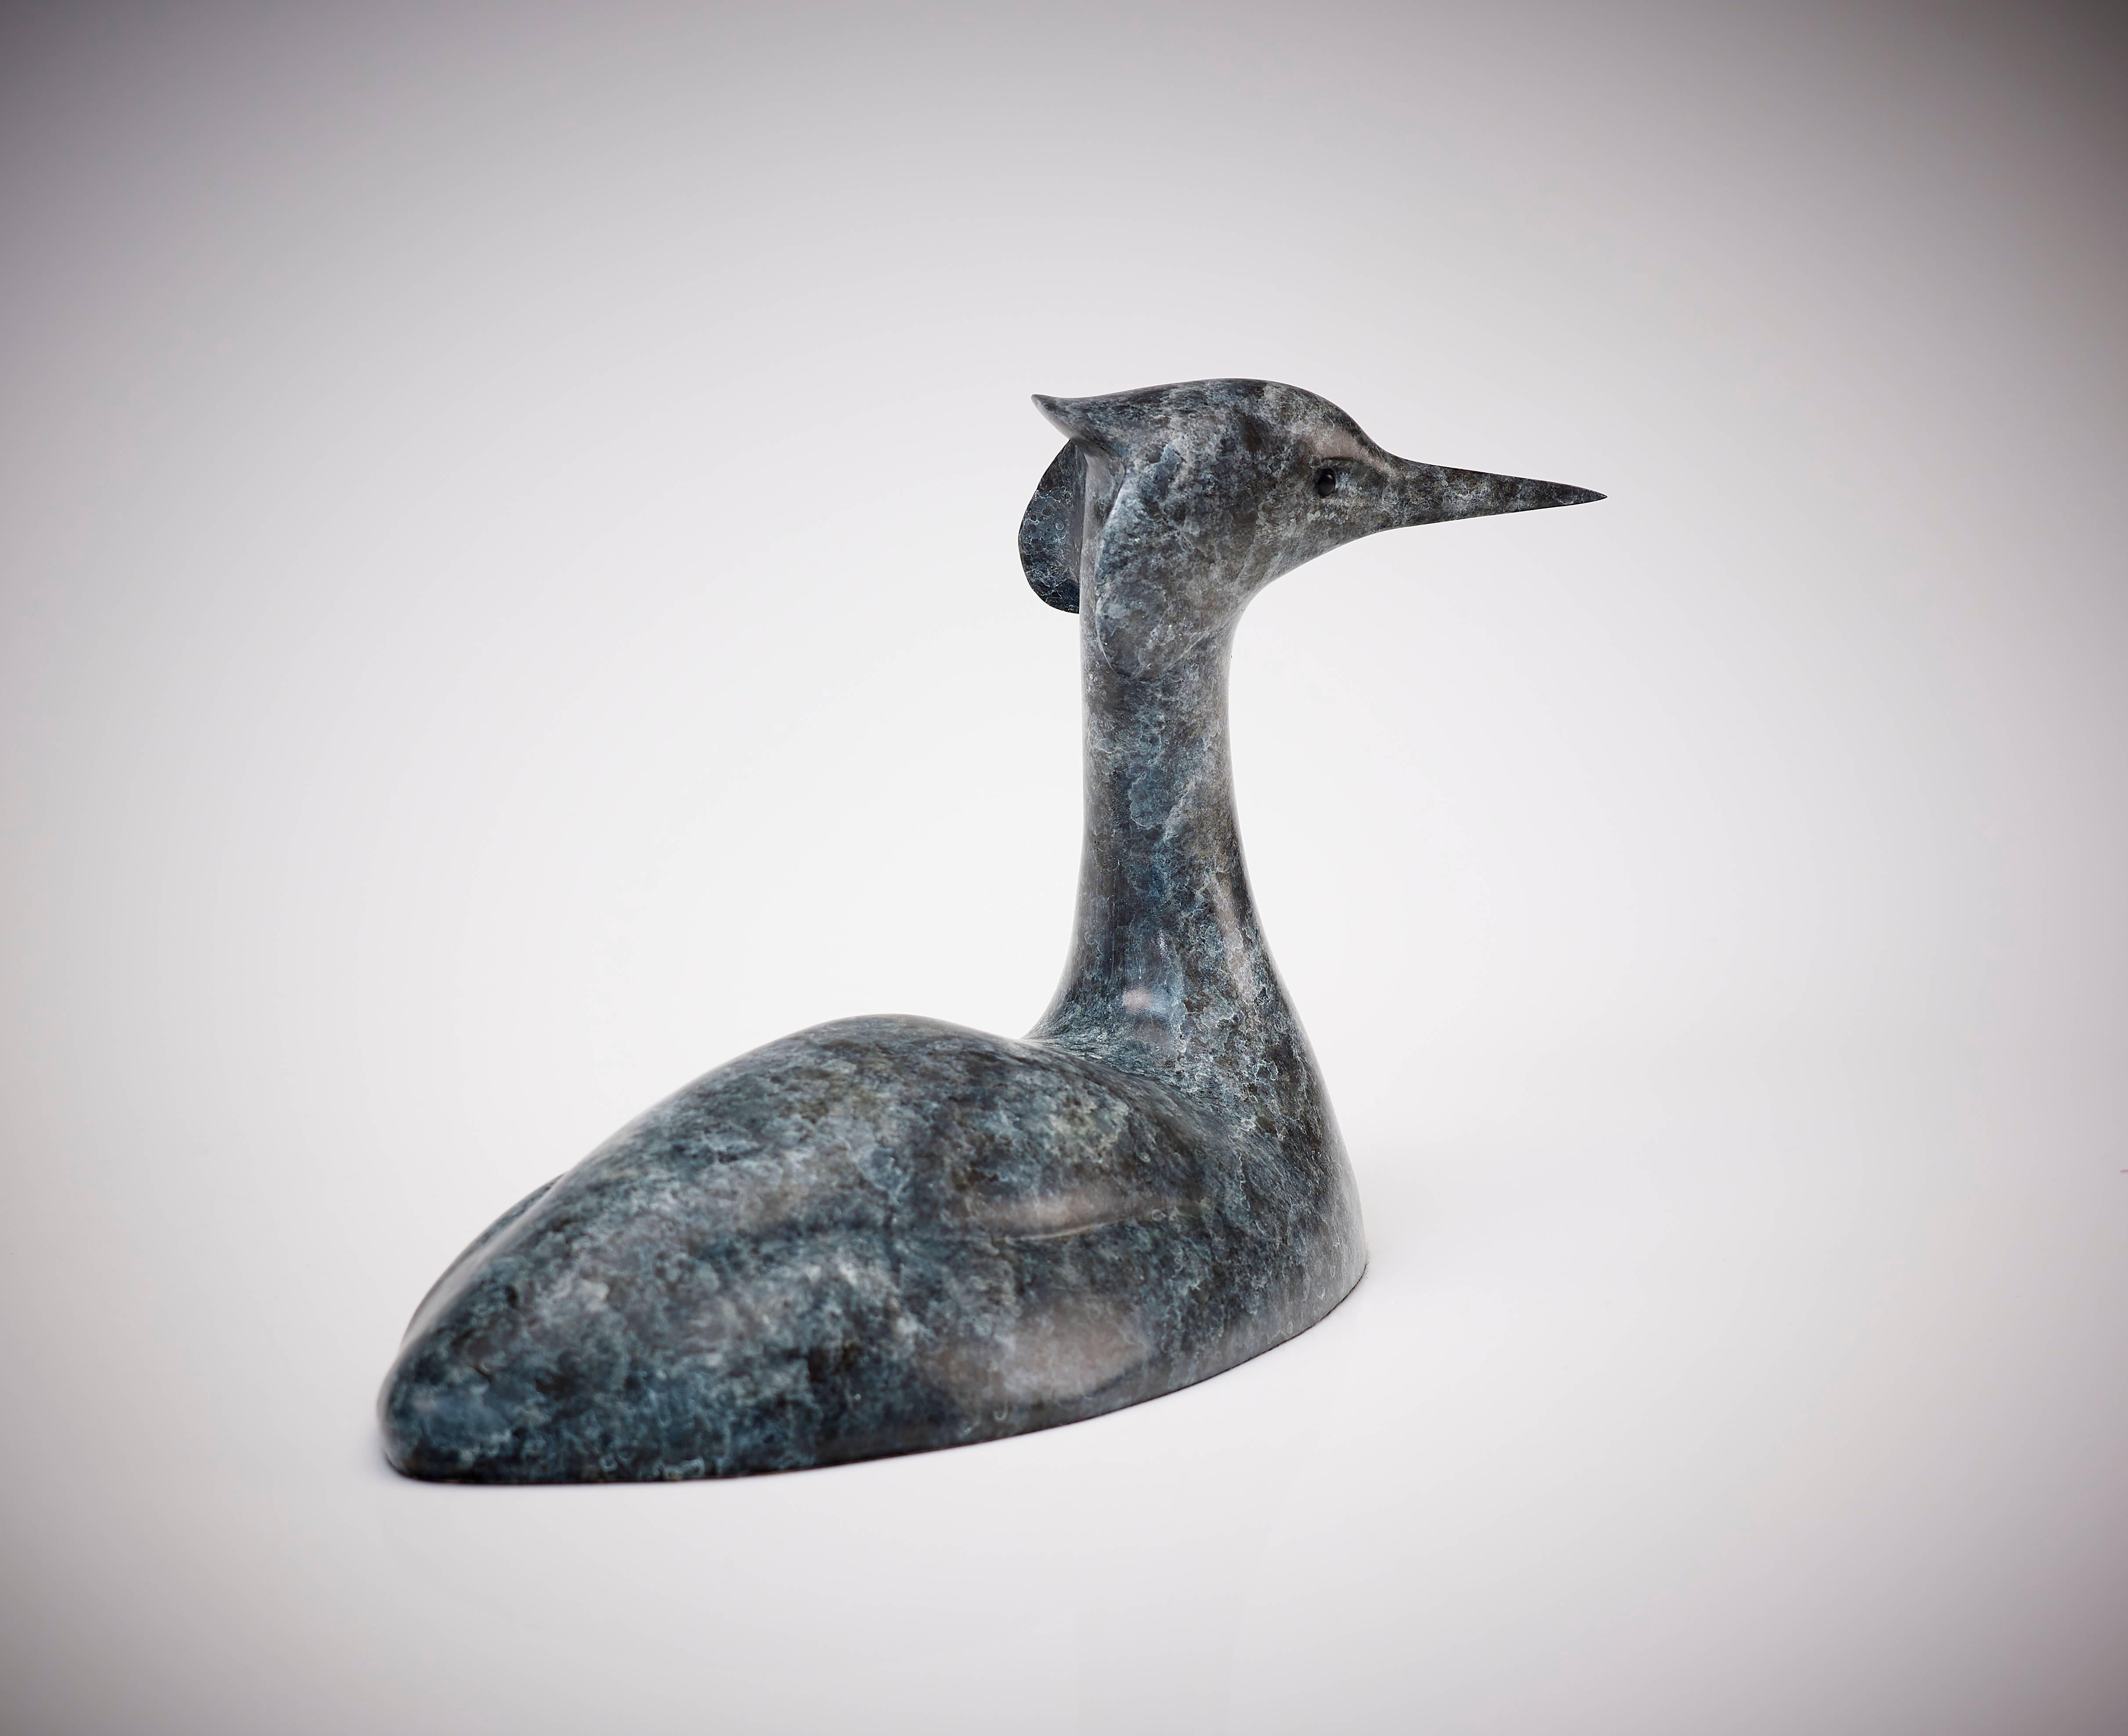 'Grebe' is a stunningly elegant Bronze sculpture. Richard Smith conveys so much character in such simple lines, exemplifying a truly wonderful talent. The fantastic richly detailed graduated Blue Patina really adds to the depth of the work.

Richard